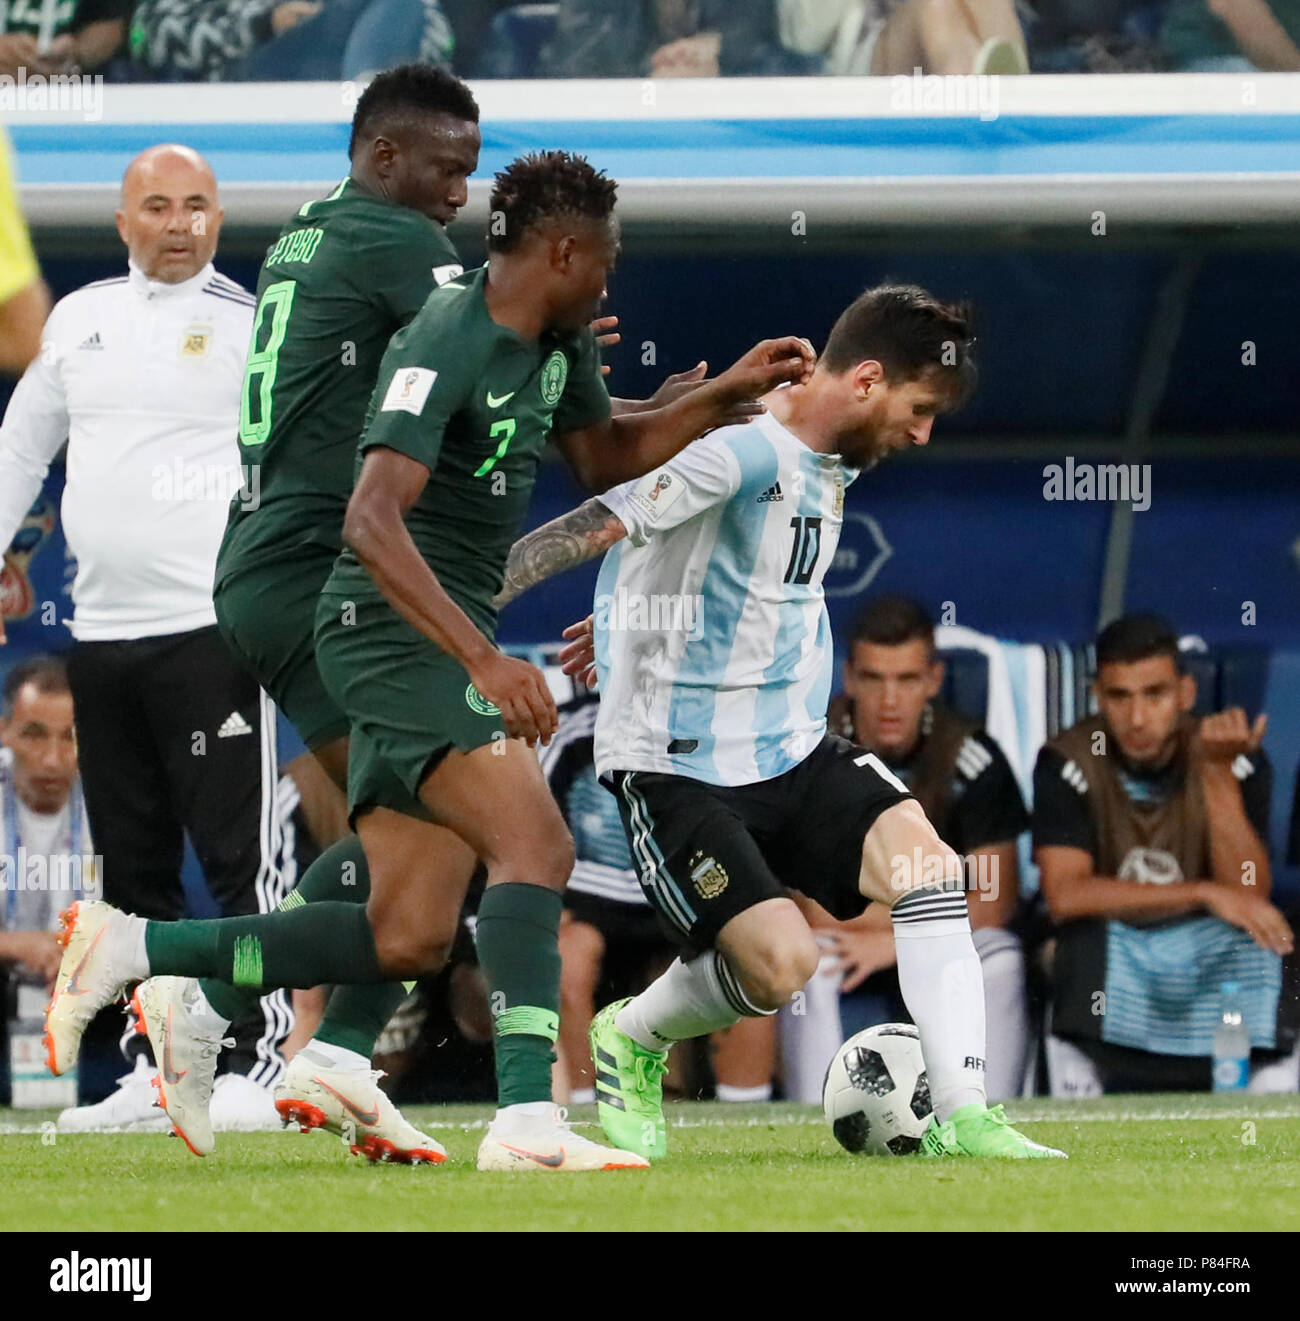 SAINT PETERSBURG, RUSSIA - JUNE 26: Argentina national team head coach Jorge Sampaoli (L) looks as Lionel Messi (R) vies for the ball with Ahmed Musa (N7) and Oghenekaro Etebo of Nigeria national team during the 2018 FIFA World Cup Russia group D match between Nigeria and Argentina at Saint Petersburg Stadium on June 26, 2018 in Saint Petersburg, Russia. (MB Media) Stock Photo